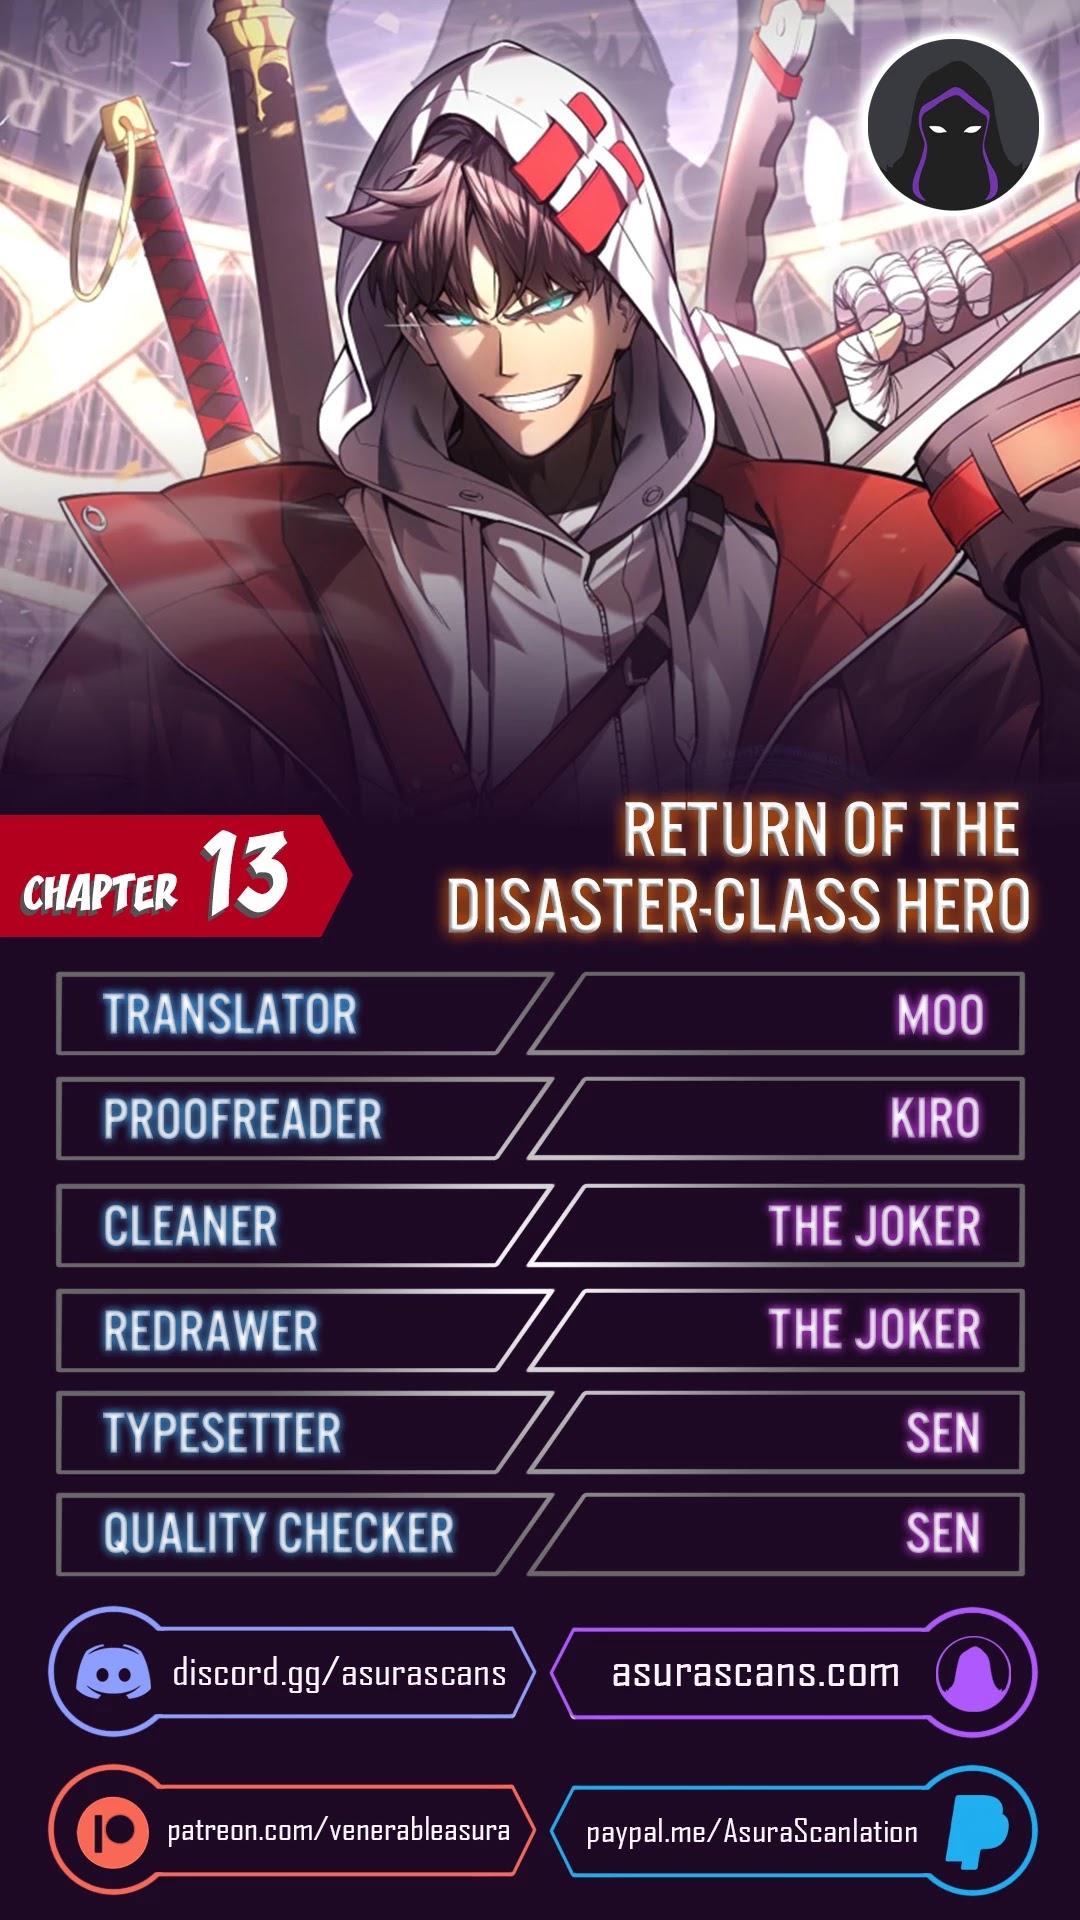 The Return Of The Disaster-Class Hero - Page 1